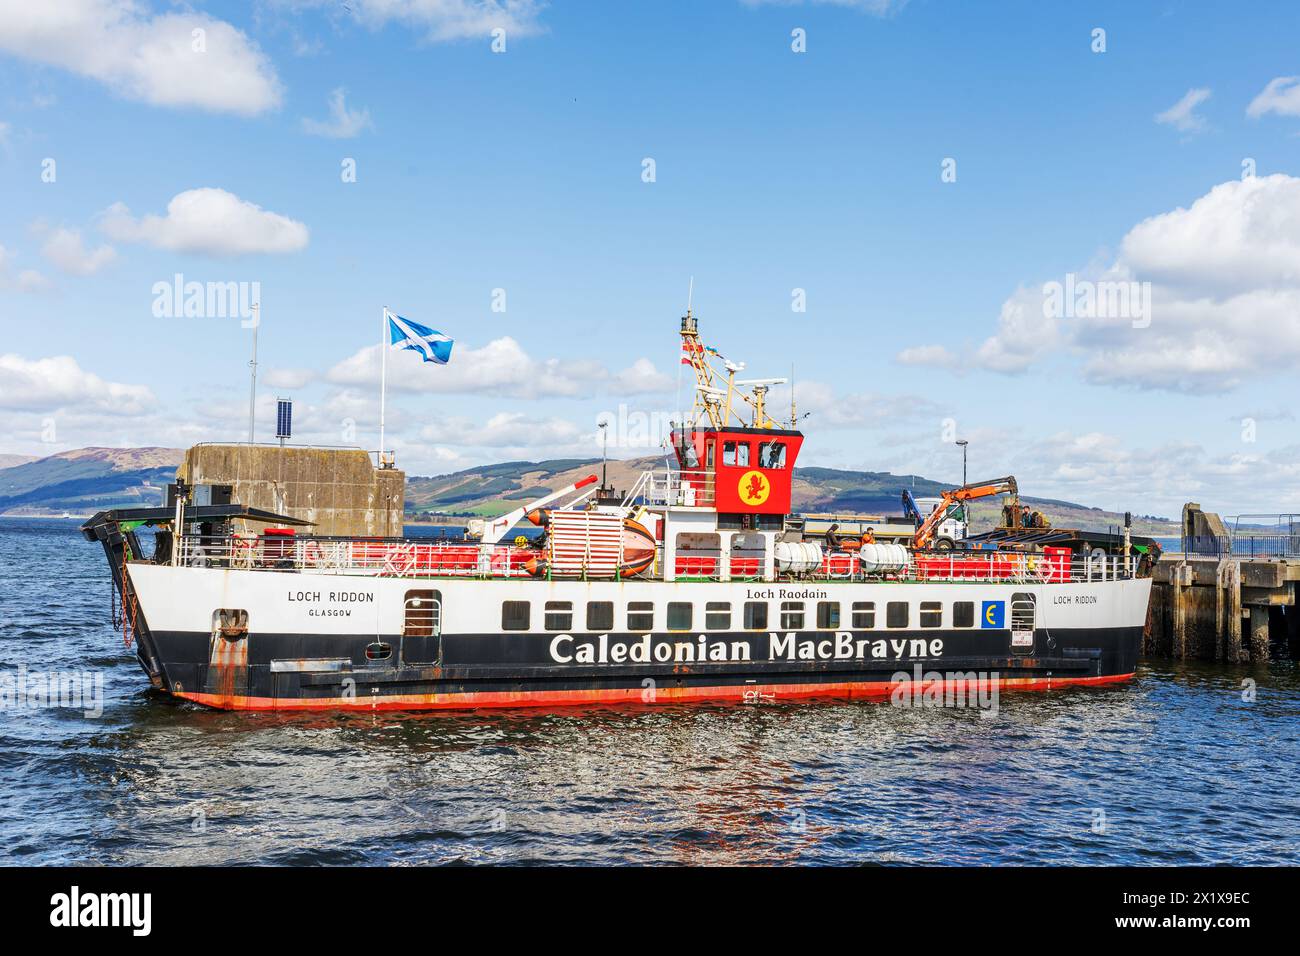 Caledonian MacBrayne MV Loch Riddon, Loch Raodain, amarré à Rothesay Pier, Isle of Bute, Firth of Clyde, Écosse, Royaume-Uni Banque D'Images